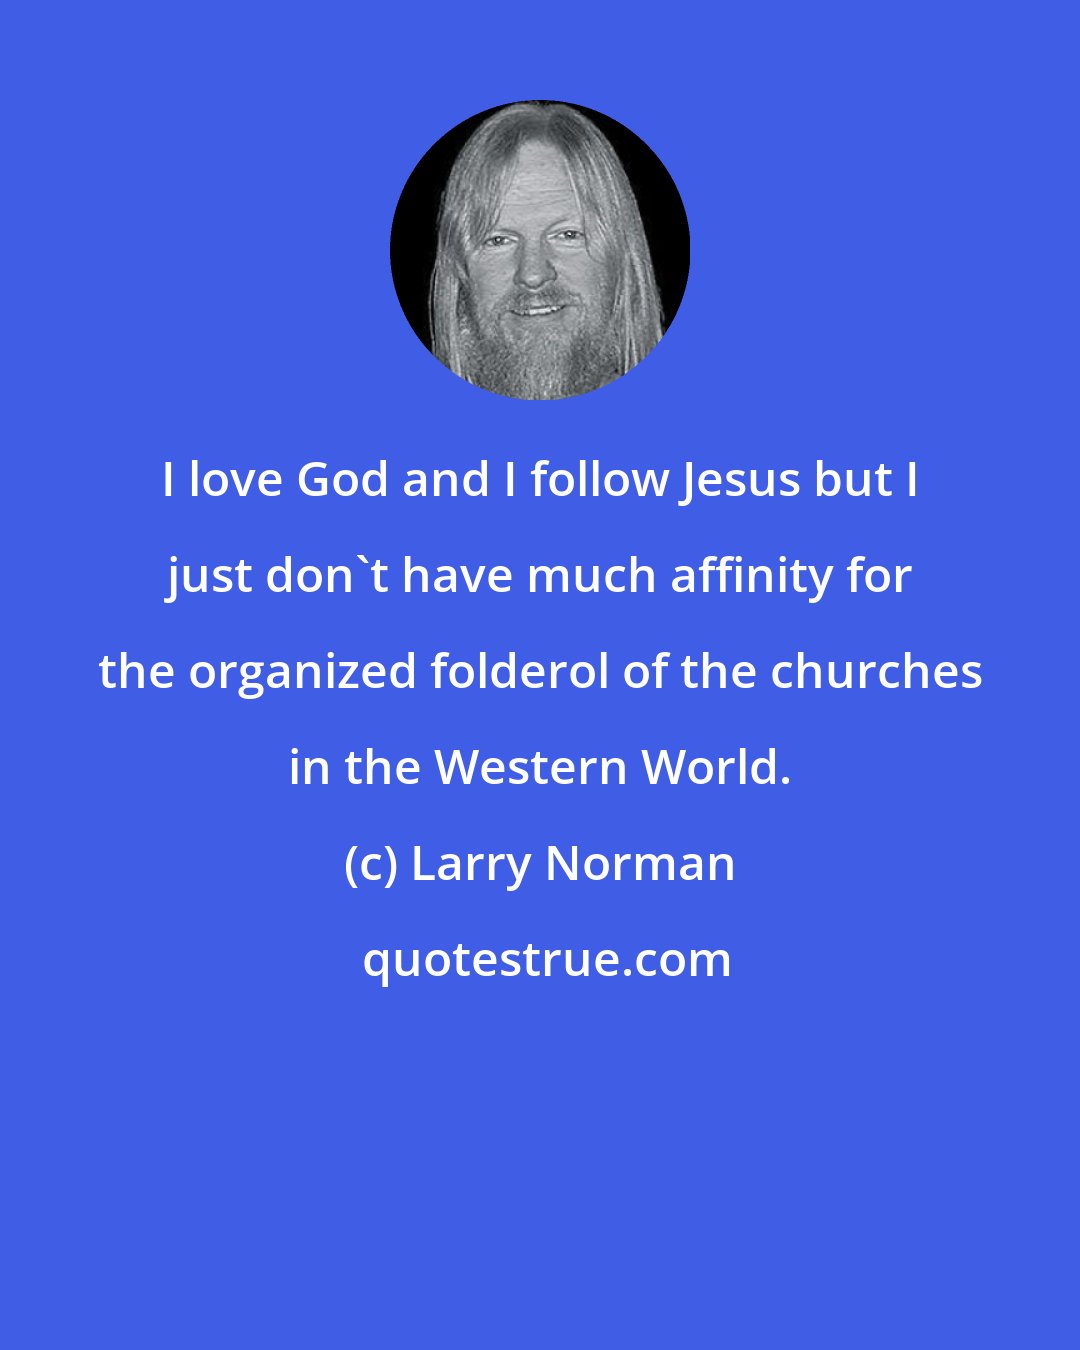 Larry Norman: I love God and I follow Jesus but I just don't have much affinity for the organized folderol of the churches in the Western World.